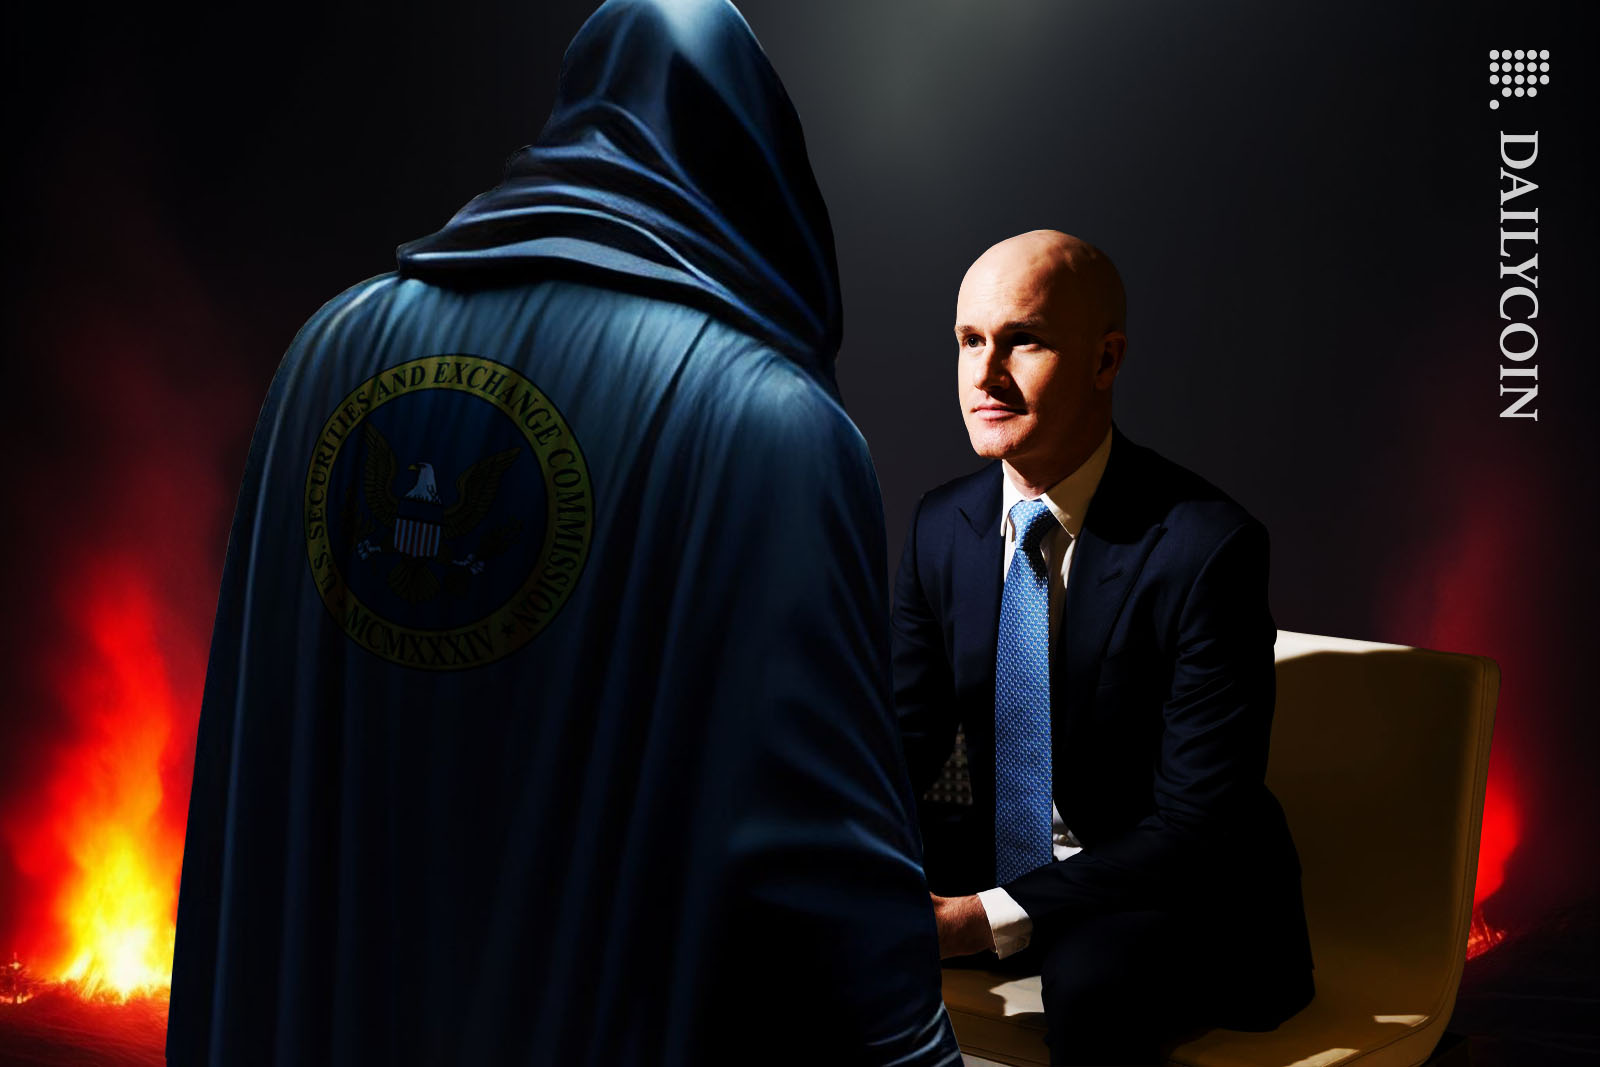 Brian Armstrong facing a dark figure from SEC in hell.